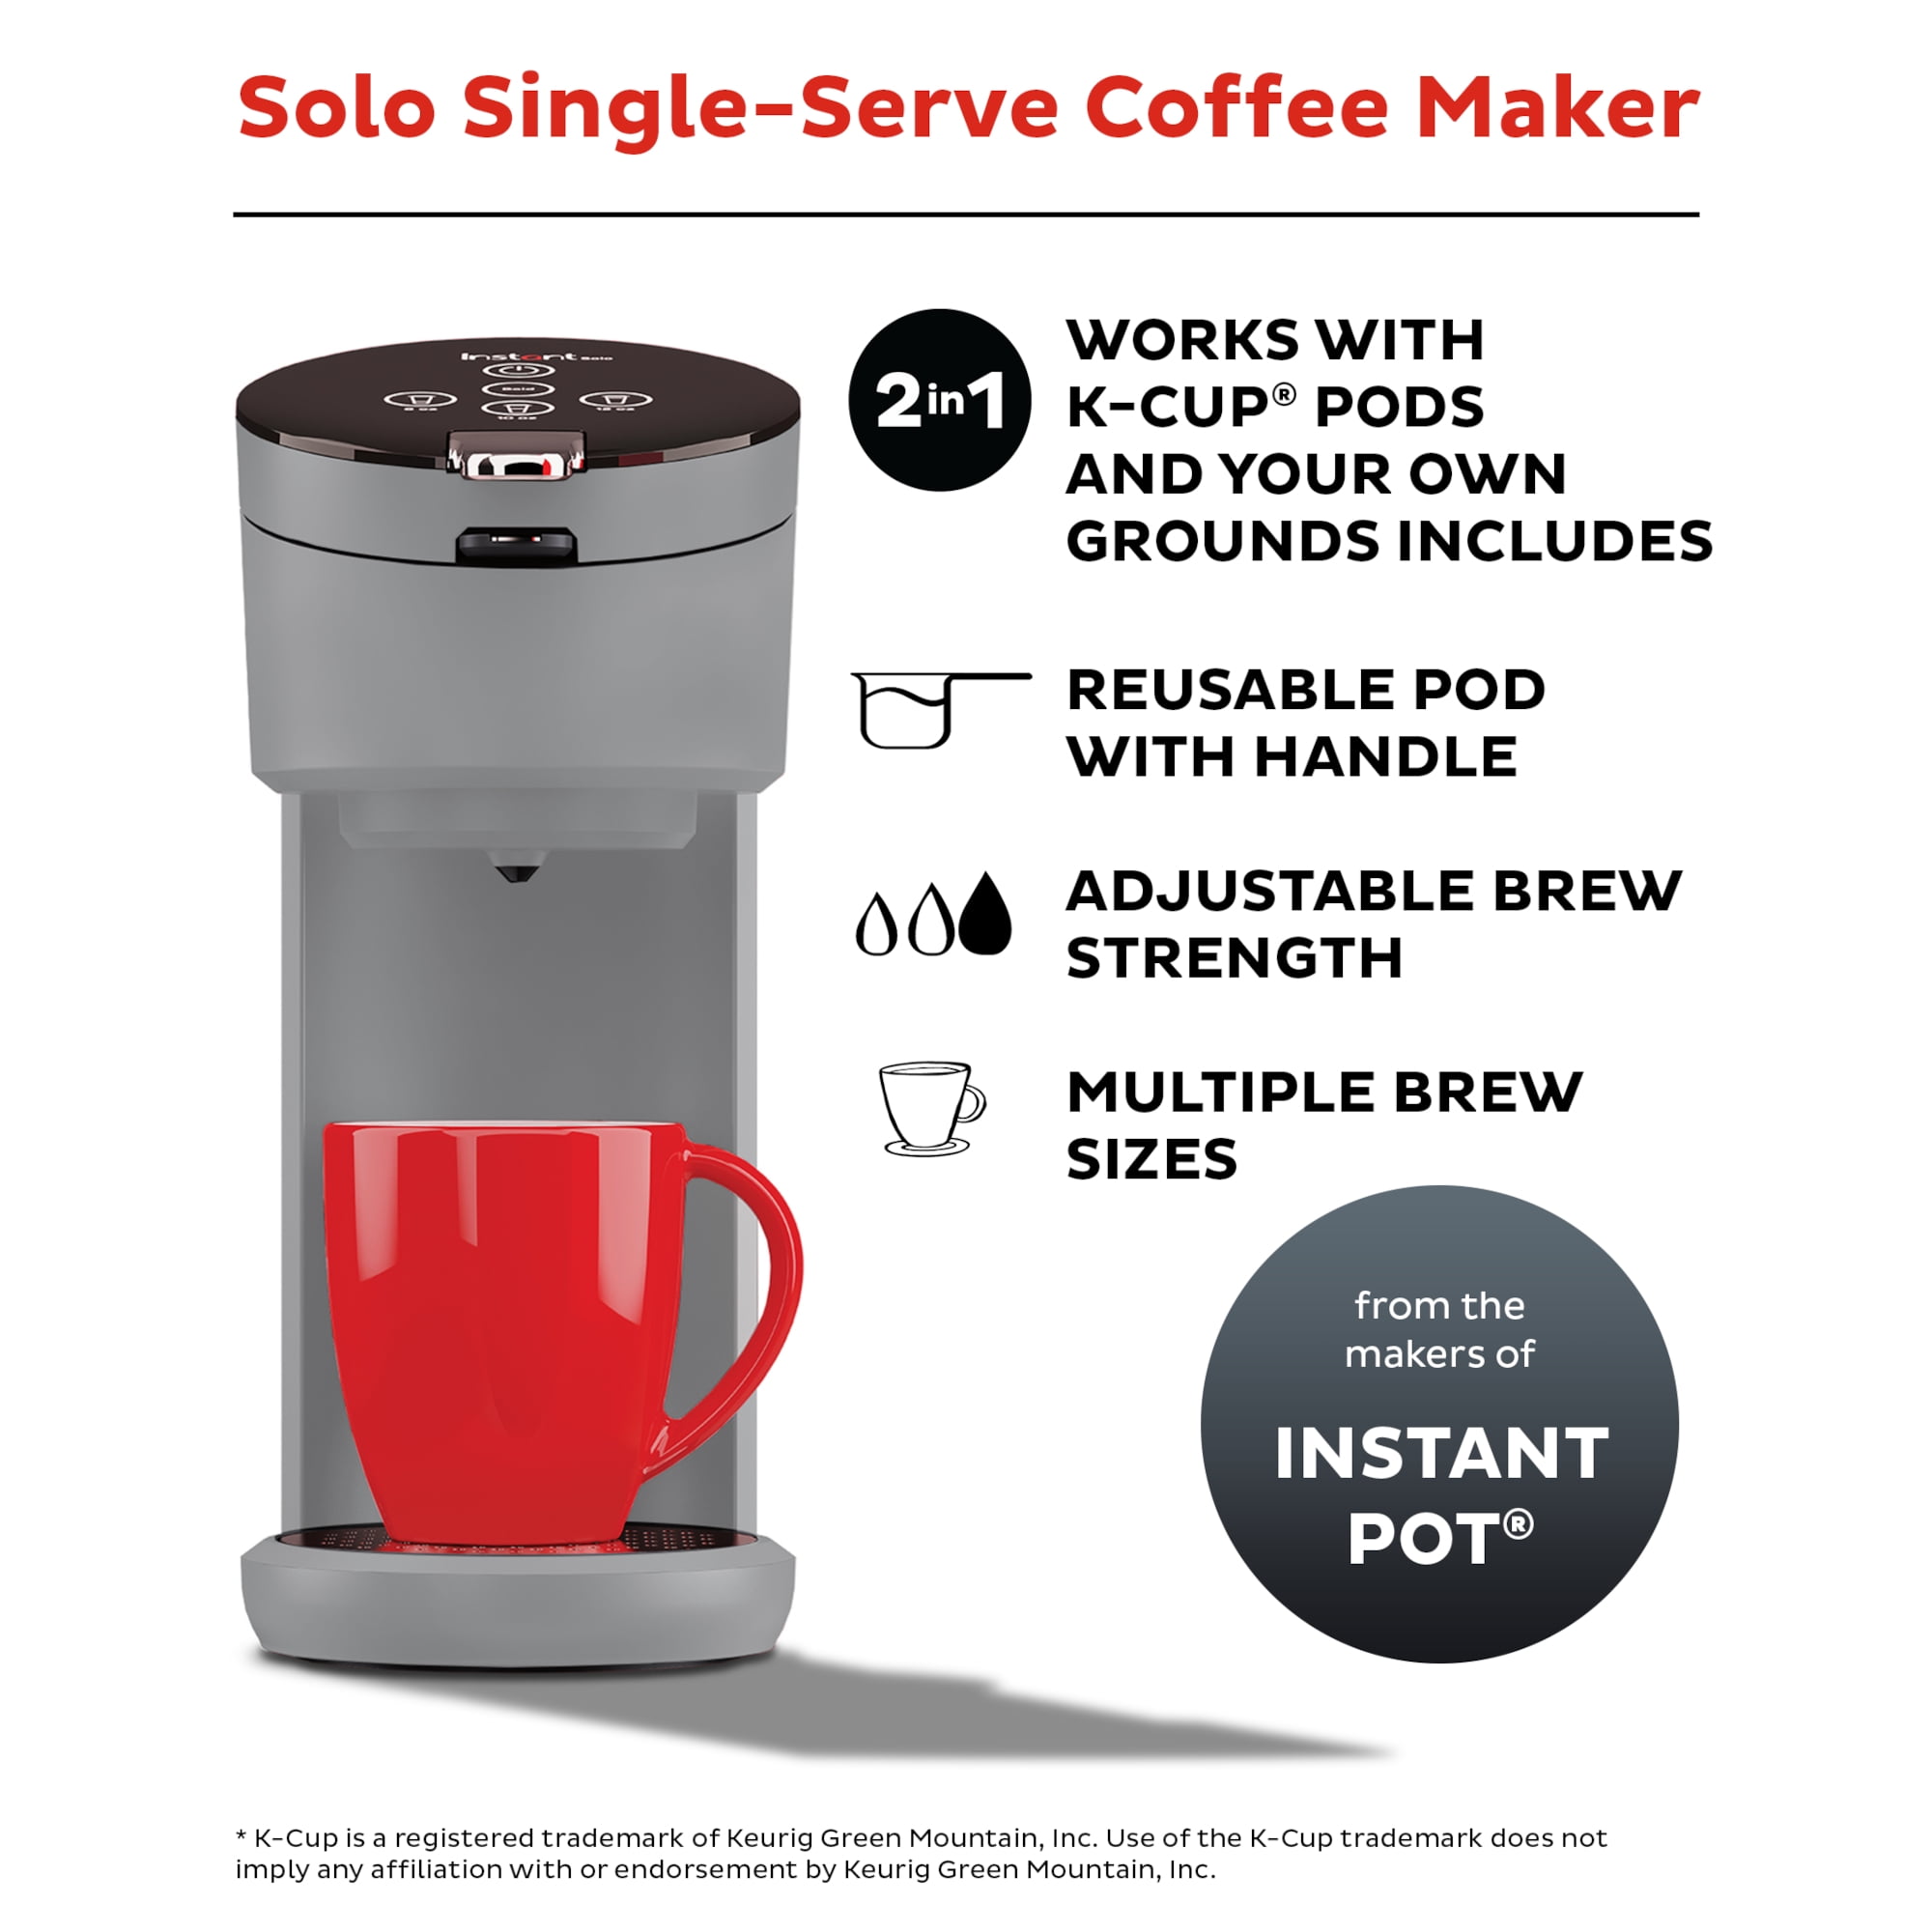 Instant Solo Coffee Maker - Unboxing & Review // POD better than K-Cup? 